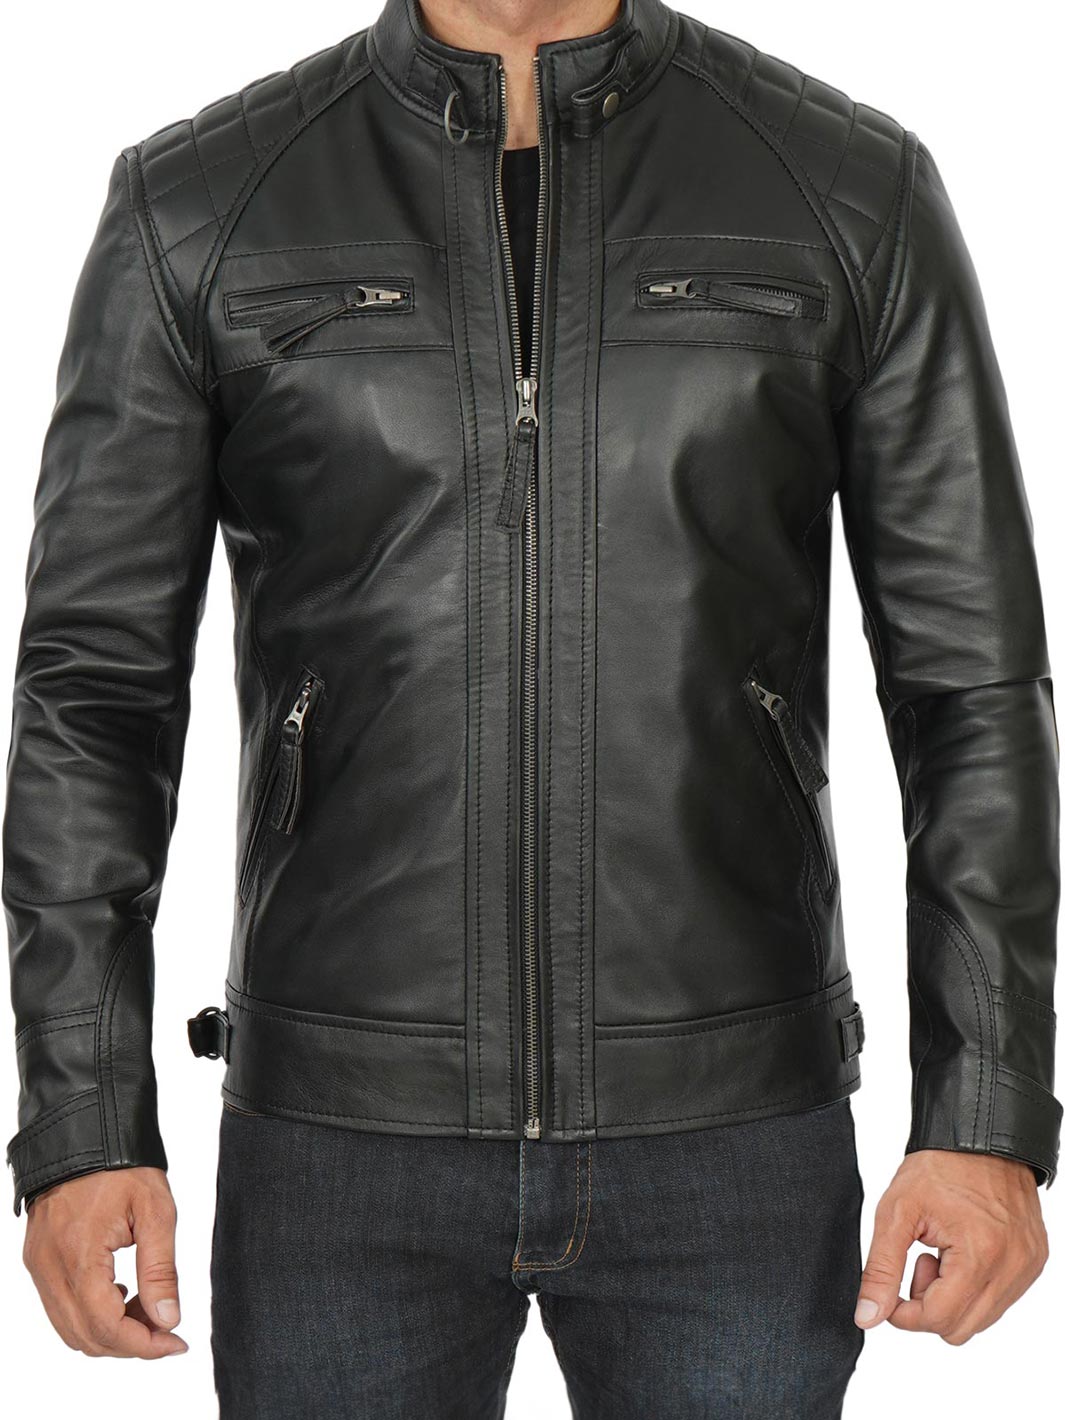 Mens Black Quilted Cafe Racer Leather Jacket | Stylish And Unique – Decrum